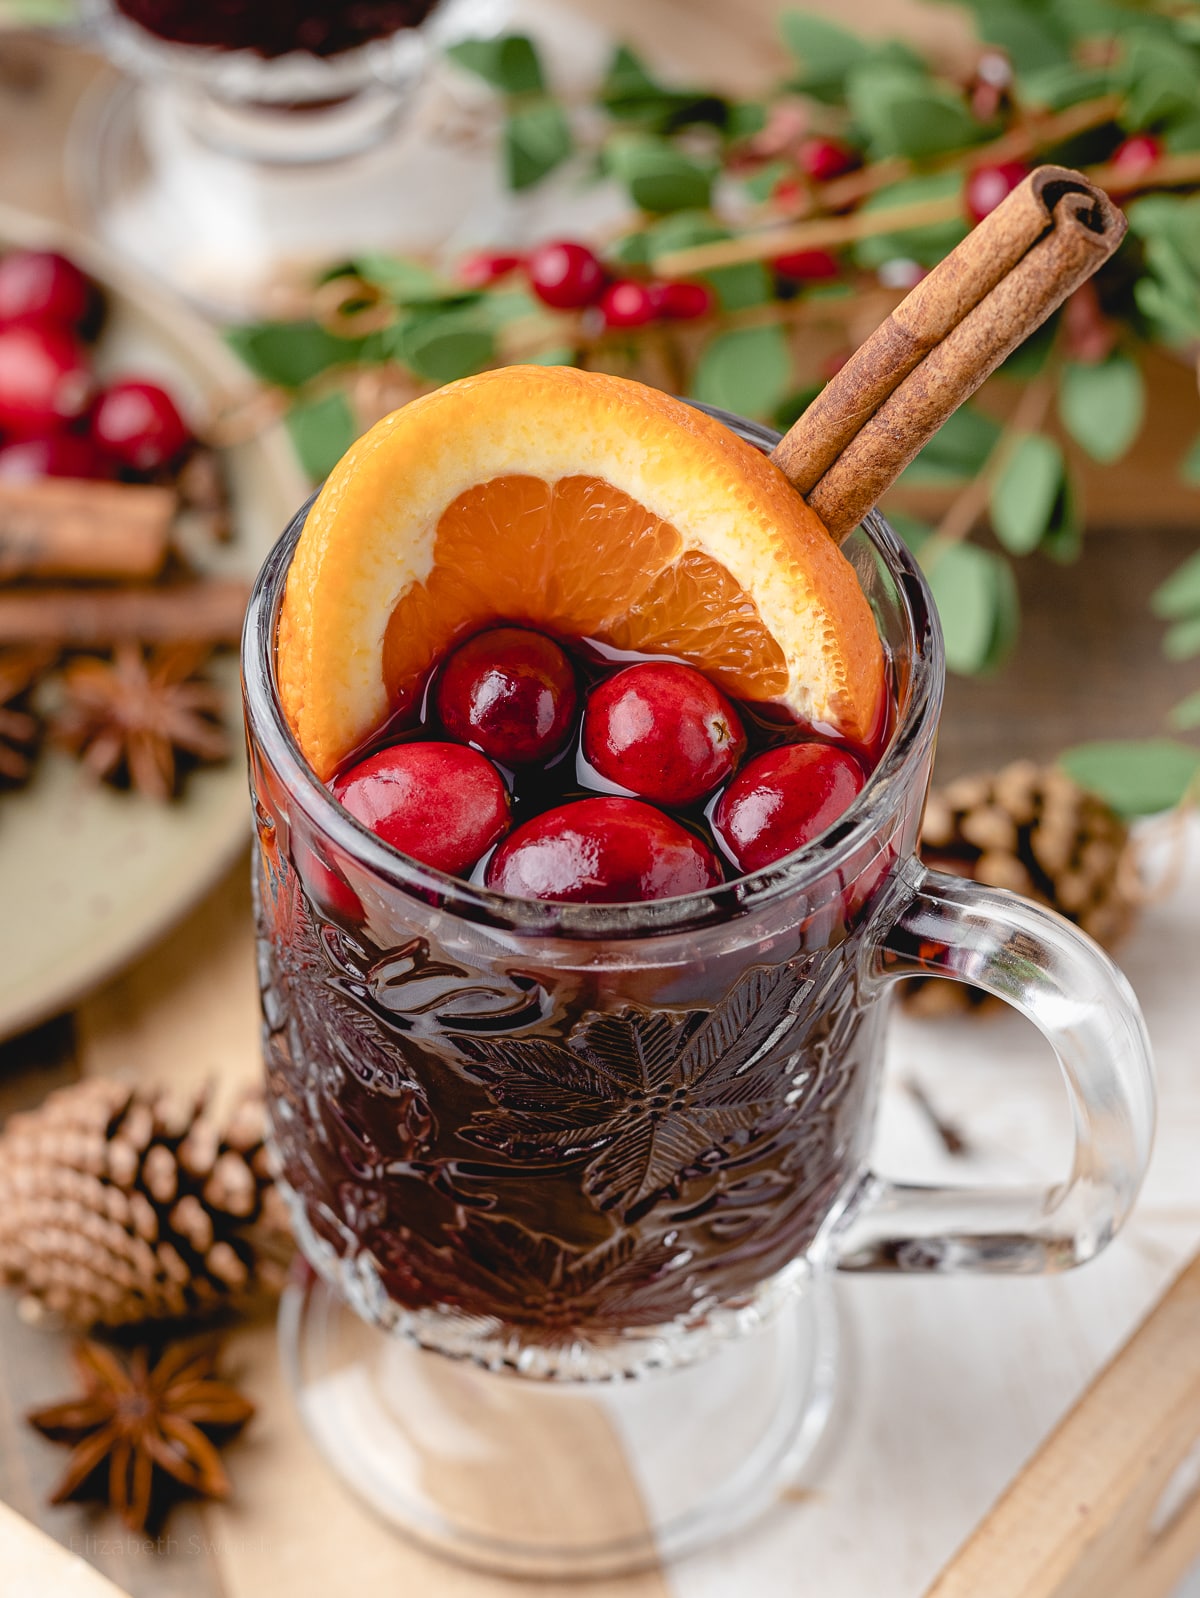 Non alcoholic mulled wine in a handled glass mug. Close up to see garnish of orange slice, cranberries, and cinnamon stick.